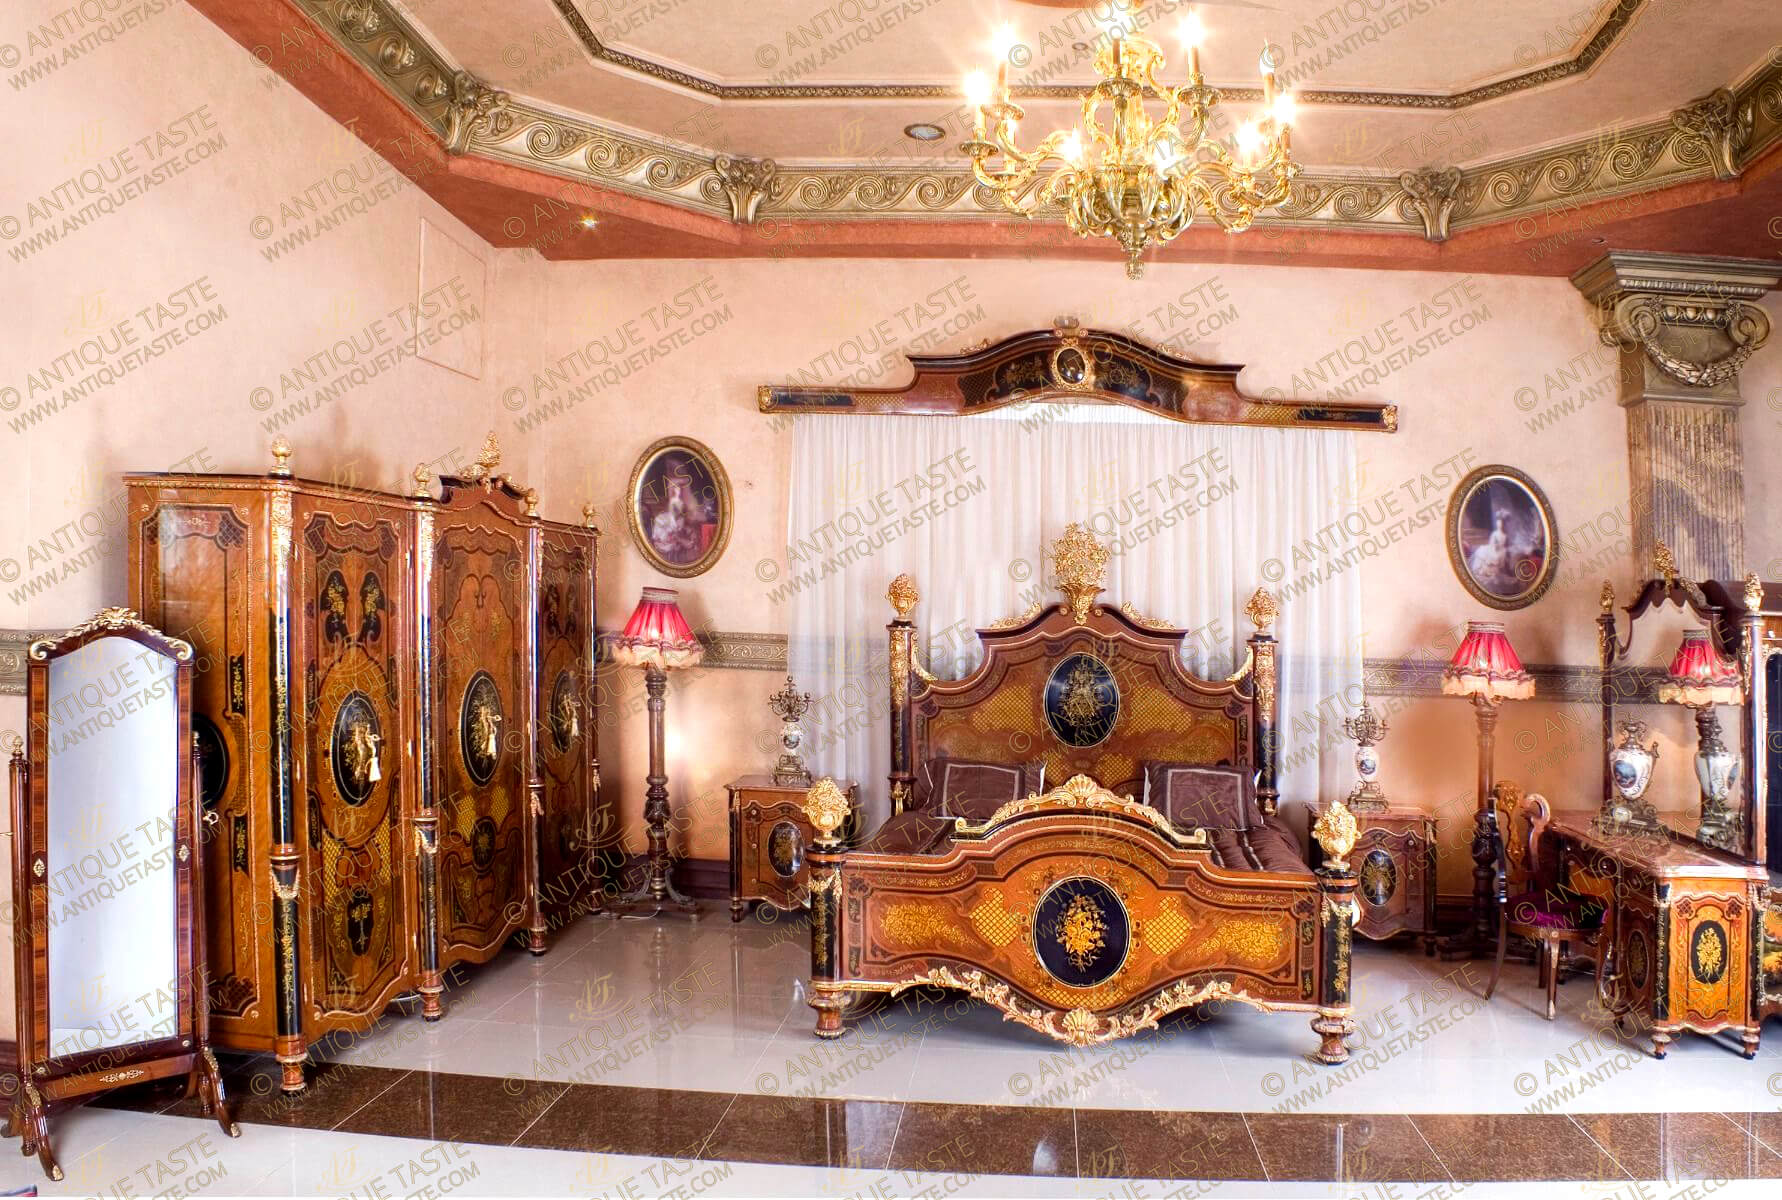 Our elaborate prestigious reproduction of the Spanish ormolu-mounted veneer, marquetry inlaid and ebonized Rocaille Royal Bedroom set after the bedroom model of Queen Isabella II of Spain circa 1830 - 1904, the extraordinary bedroom set is made of solid walnut wood and lavishly ormolu embellished with rocaille encadrements, scallops, scrolling acanthus, ormolu flower bouquets, ormolu festoons, ormolu swaging garlands and stunning extensive marquetry patterns; the set is ebonized in harmony and hand painted with foliate designs and comprising of one bed, one armoire, one vanity with mirror, one chair, one curtain cornice and two bedside tables. The original Bedroom is exhibited in the Royal Palace of Aranjuez, Madrid in the town of Aranjuez, the bedroom was the wedding gift the queen received from the city of Barcelona and was used firstly by King Charles IV during the 18th century as his private office but later in the 19th century, it became a bedroom. The bedroom was made by Juan Bautista de Toledo the famous Spanish architect.